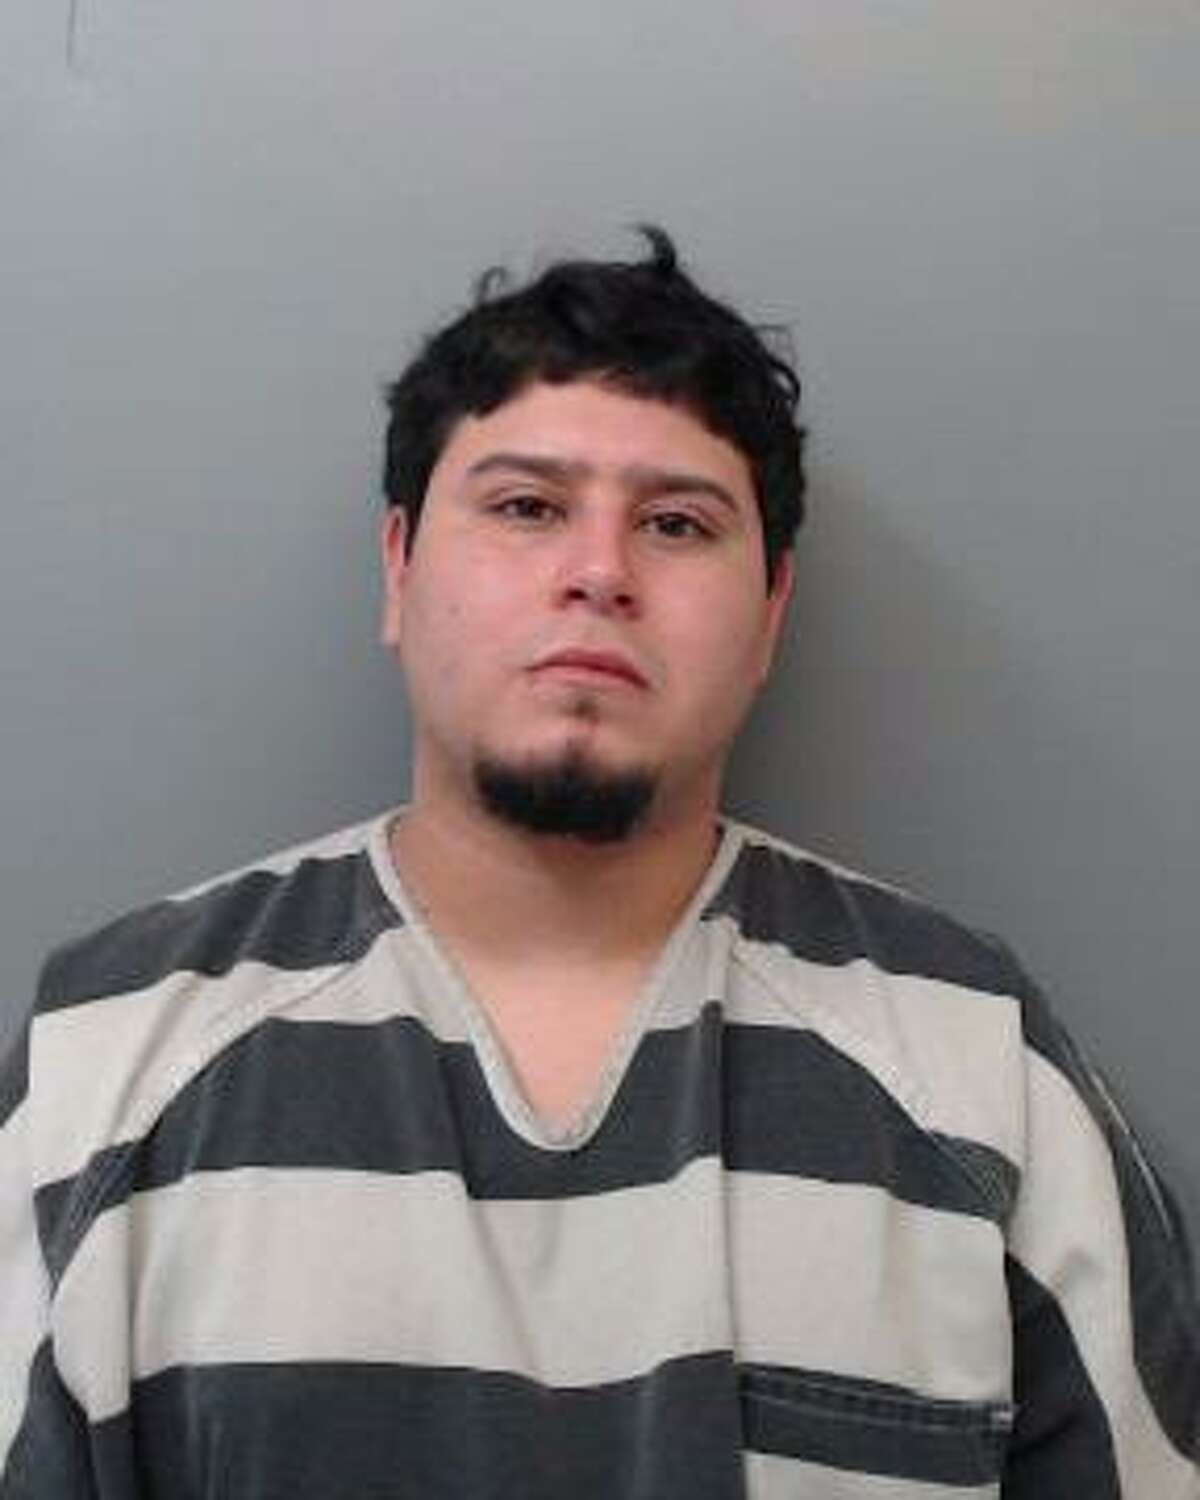 Joseph Andrew Ortiz, 21, possession of a controlled substance.